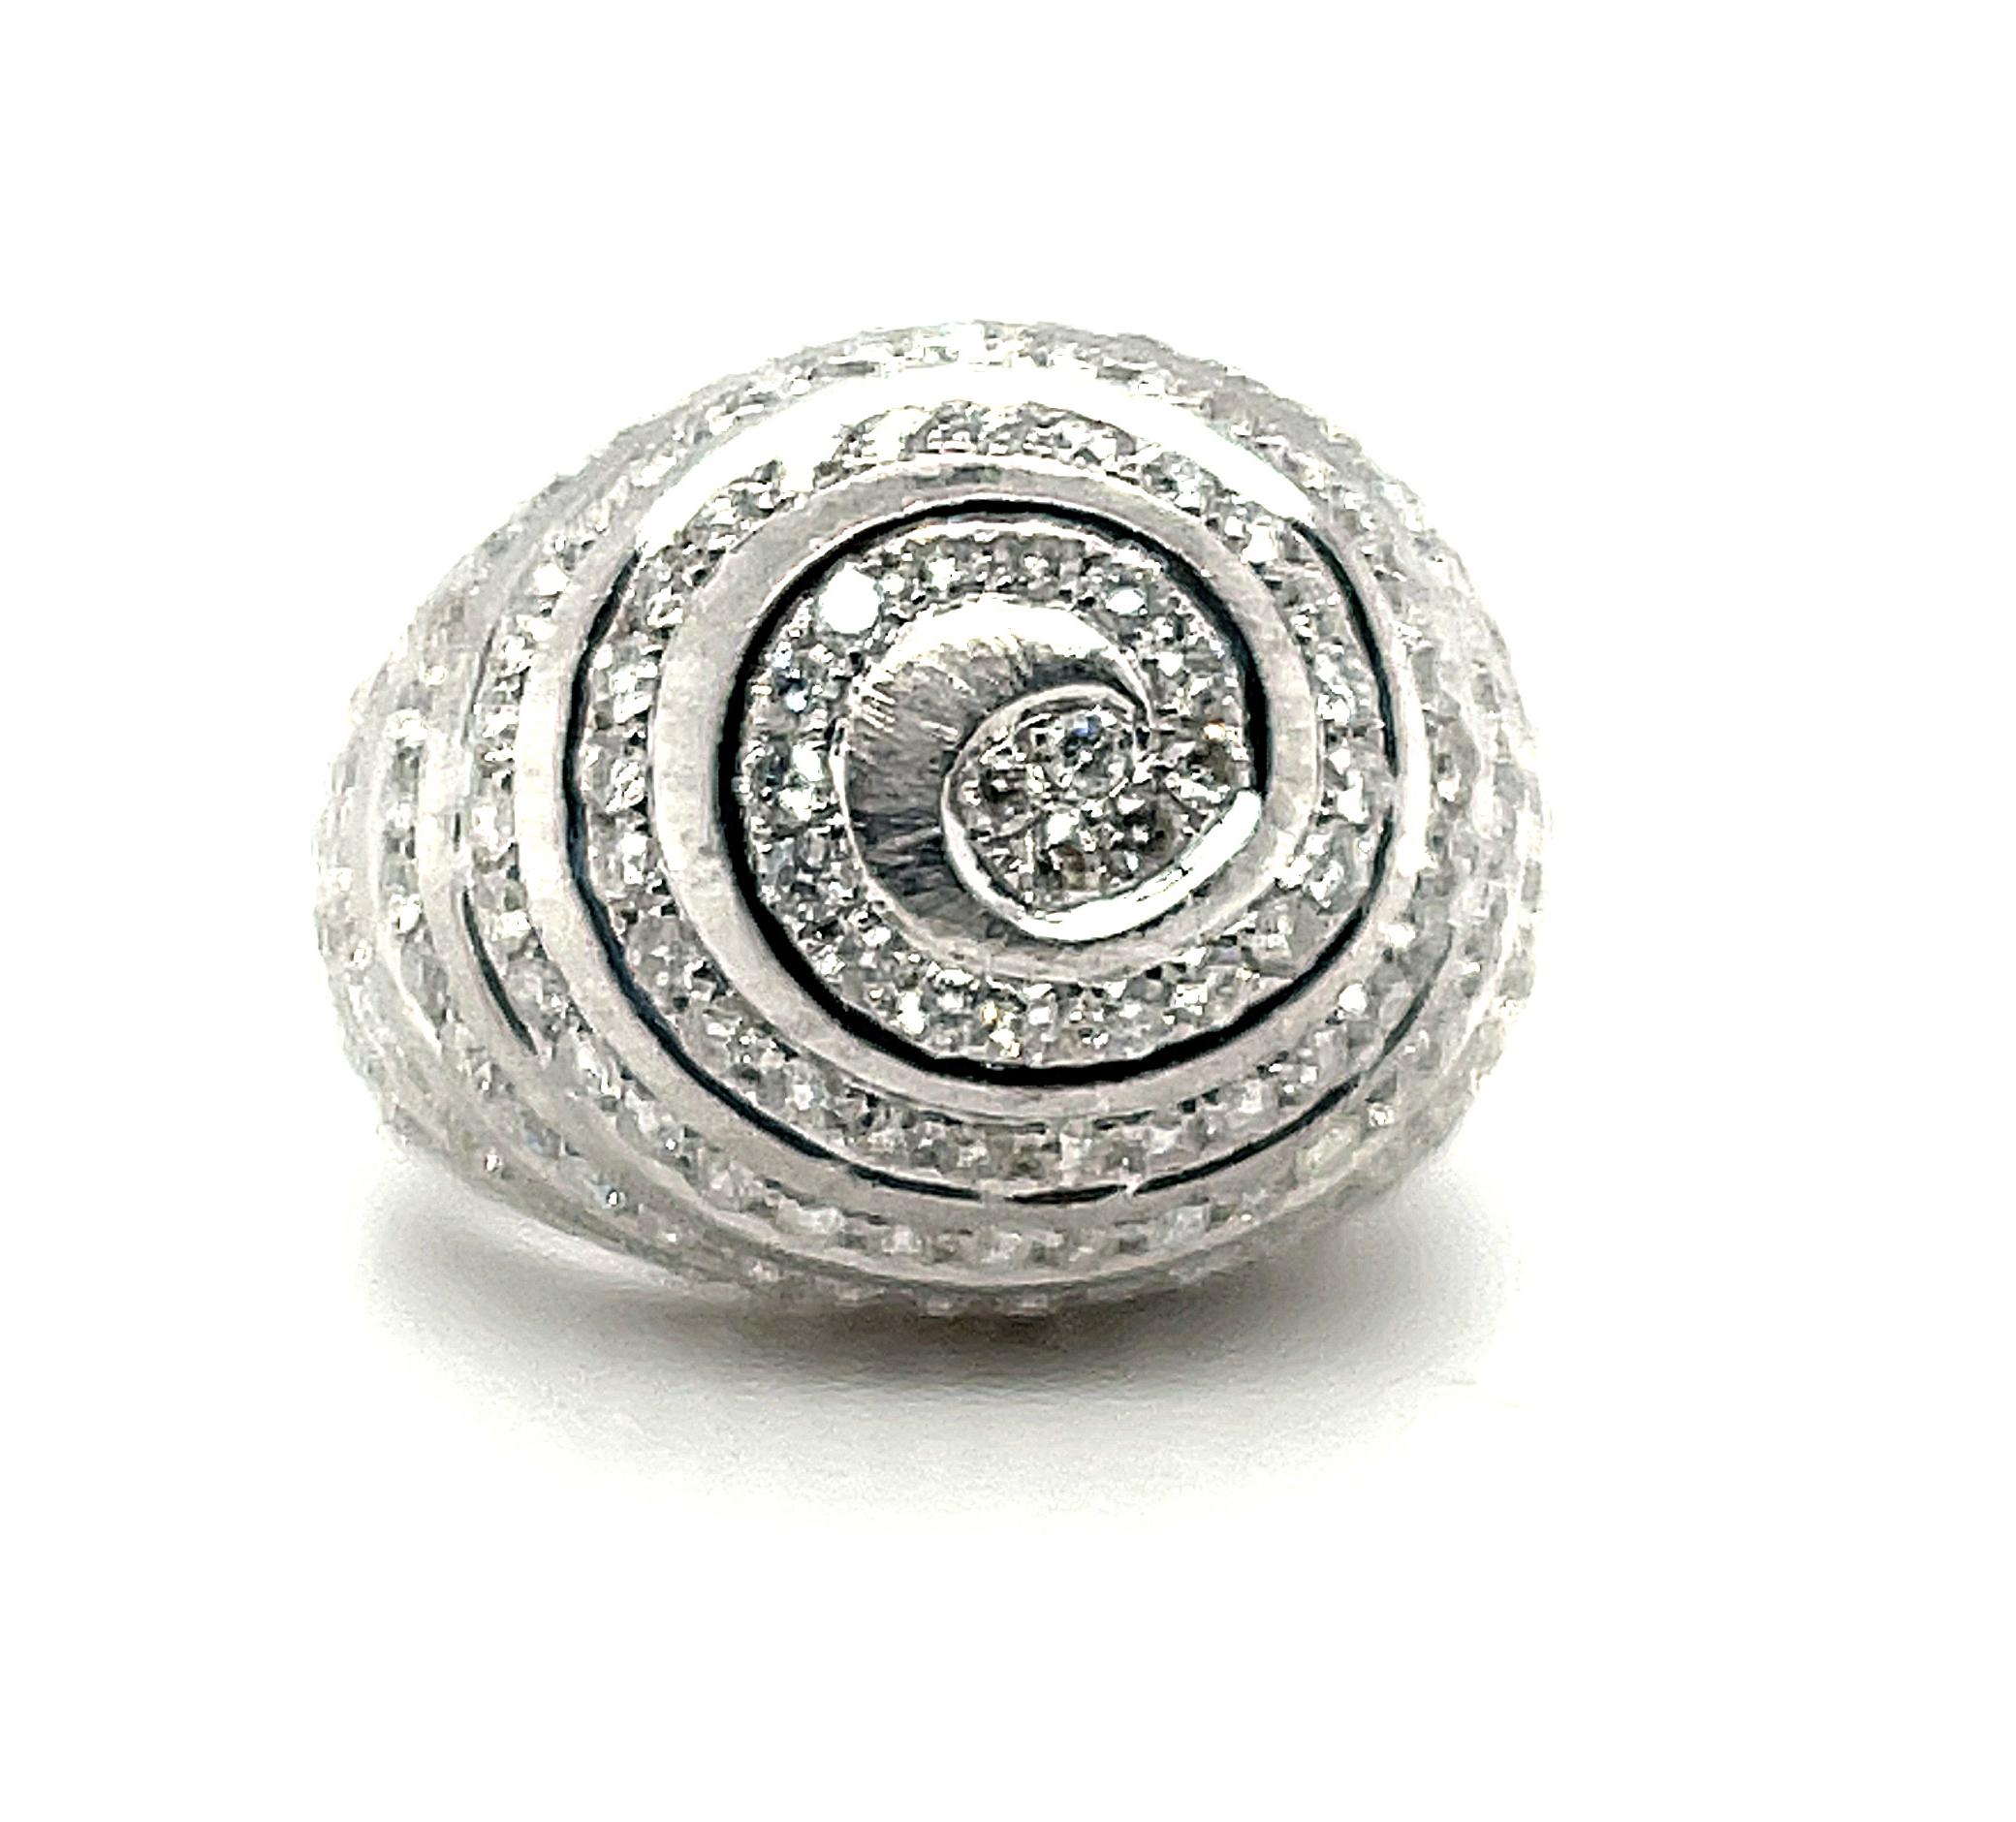 This Art Deco inspired dome ring features over two and a half carats of dazzling white diamonds set in 18k white gold spirals! It is a hypnotic design made up of gorgeous curves that will not go unnoticed - and neither will you! Make this your new